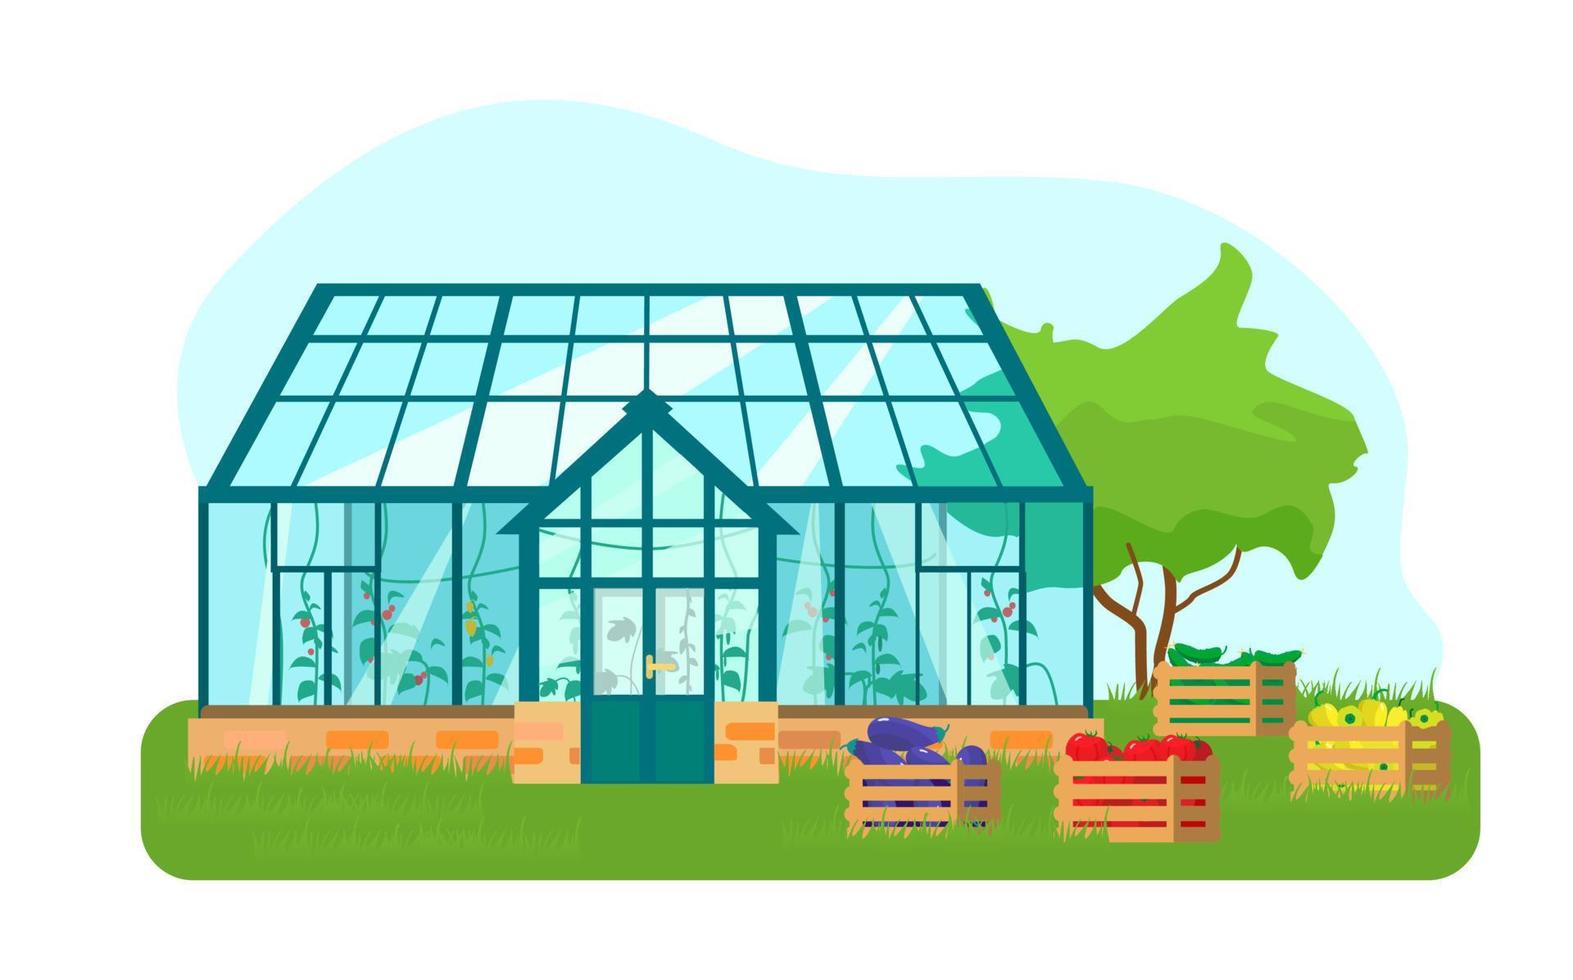 Vector illustration of greenhouse with different plants inside in flat style. Glass house with tomatoes and cucumber plants. Wooden boxes with vegetables.